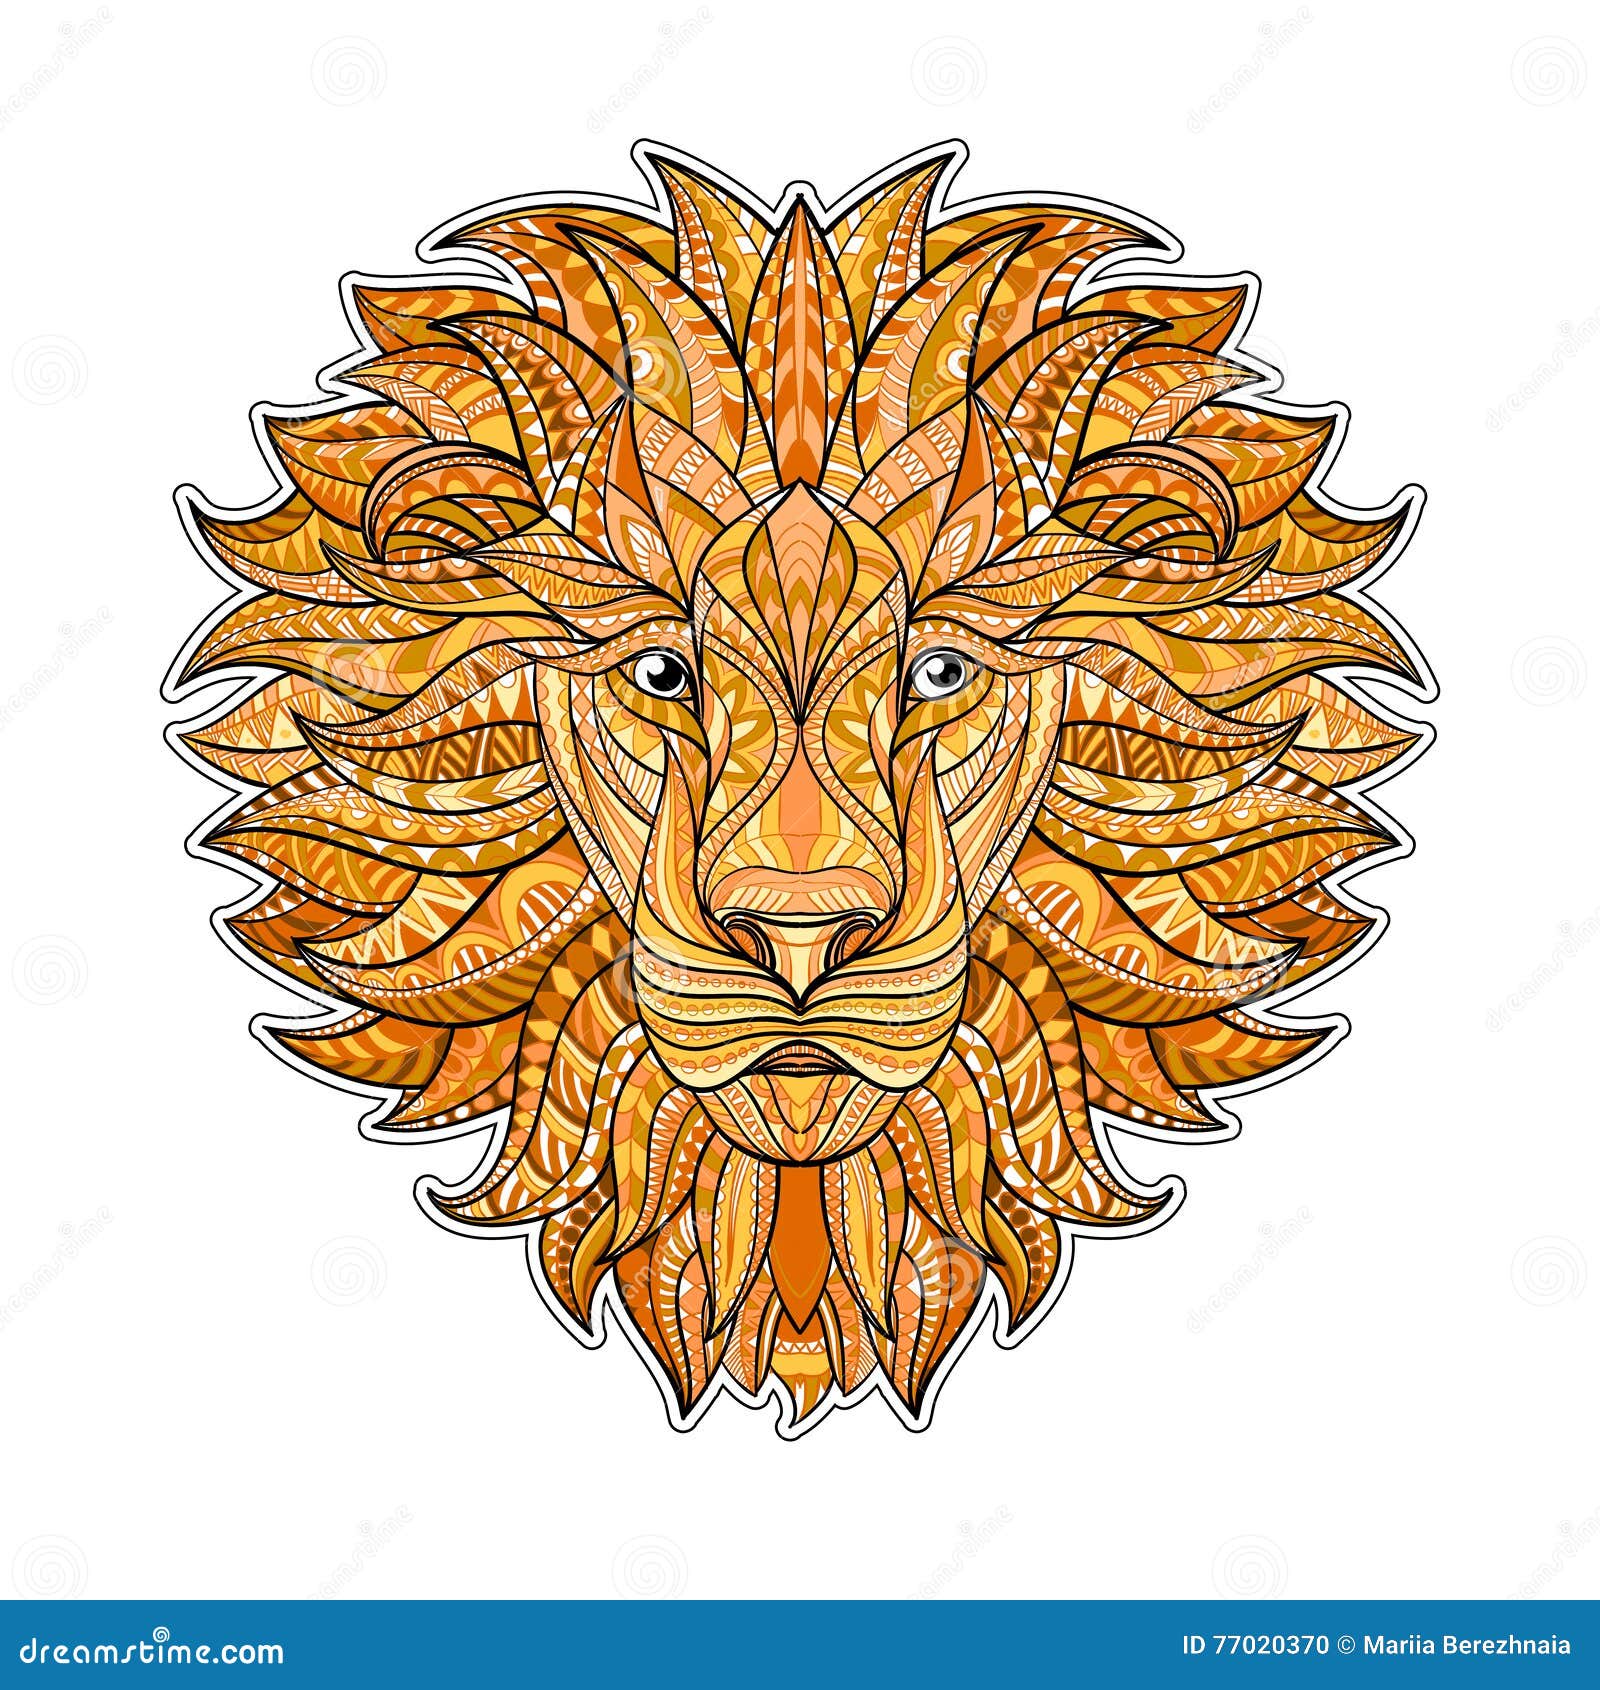 Detailed Colored Lion in Aztec Style. Patterned Head of the on Background. African Indian Totem Tattoo Design Stock Vector - Illustration of drawing, zodiac: 77020370